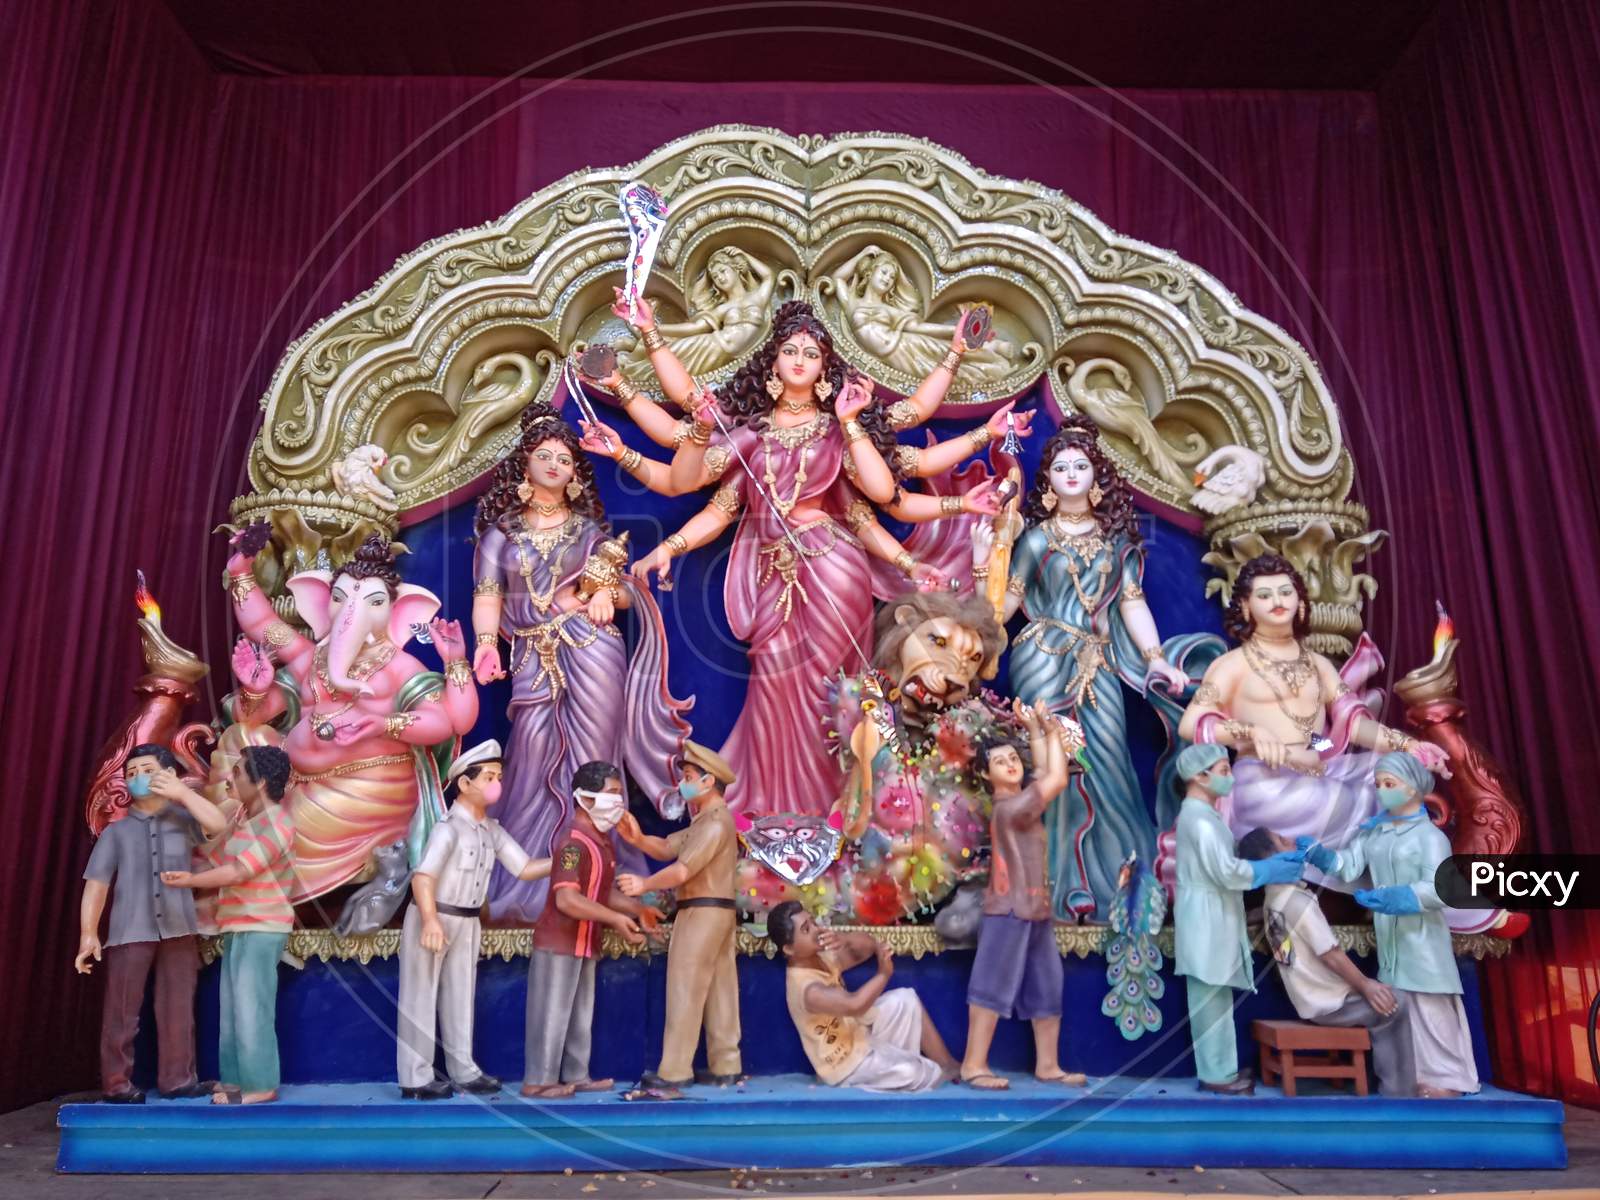 Durga Puja's theme are reflecting the pandemic situation